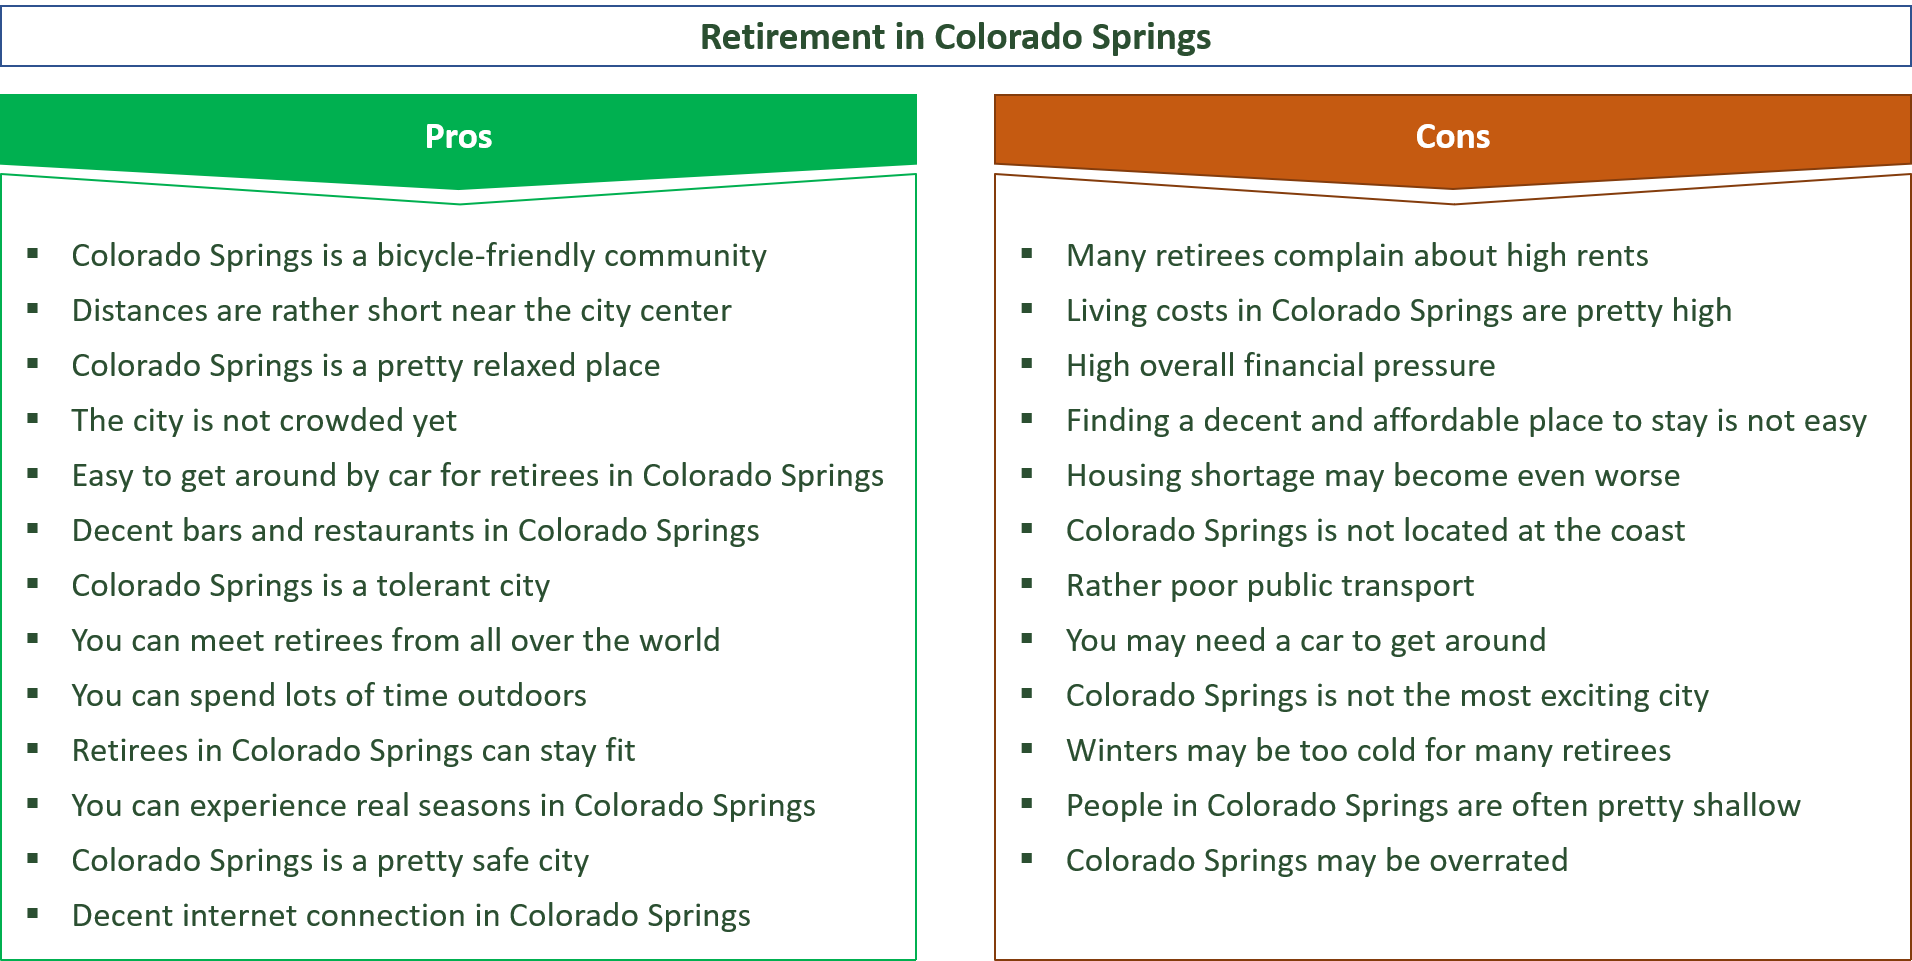 advantages and disadvantages of retiring in colorado springs